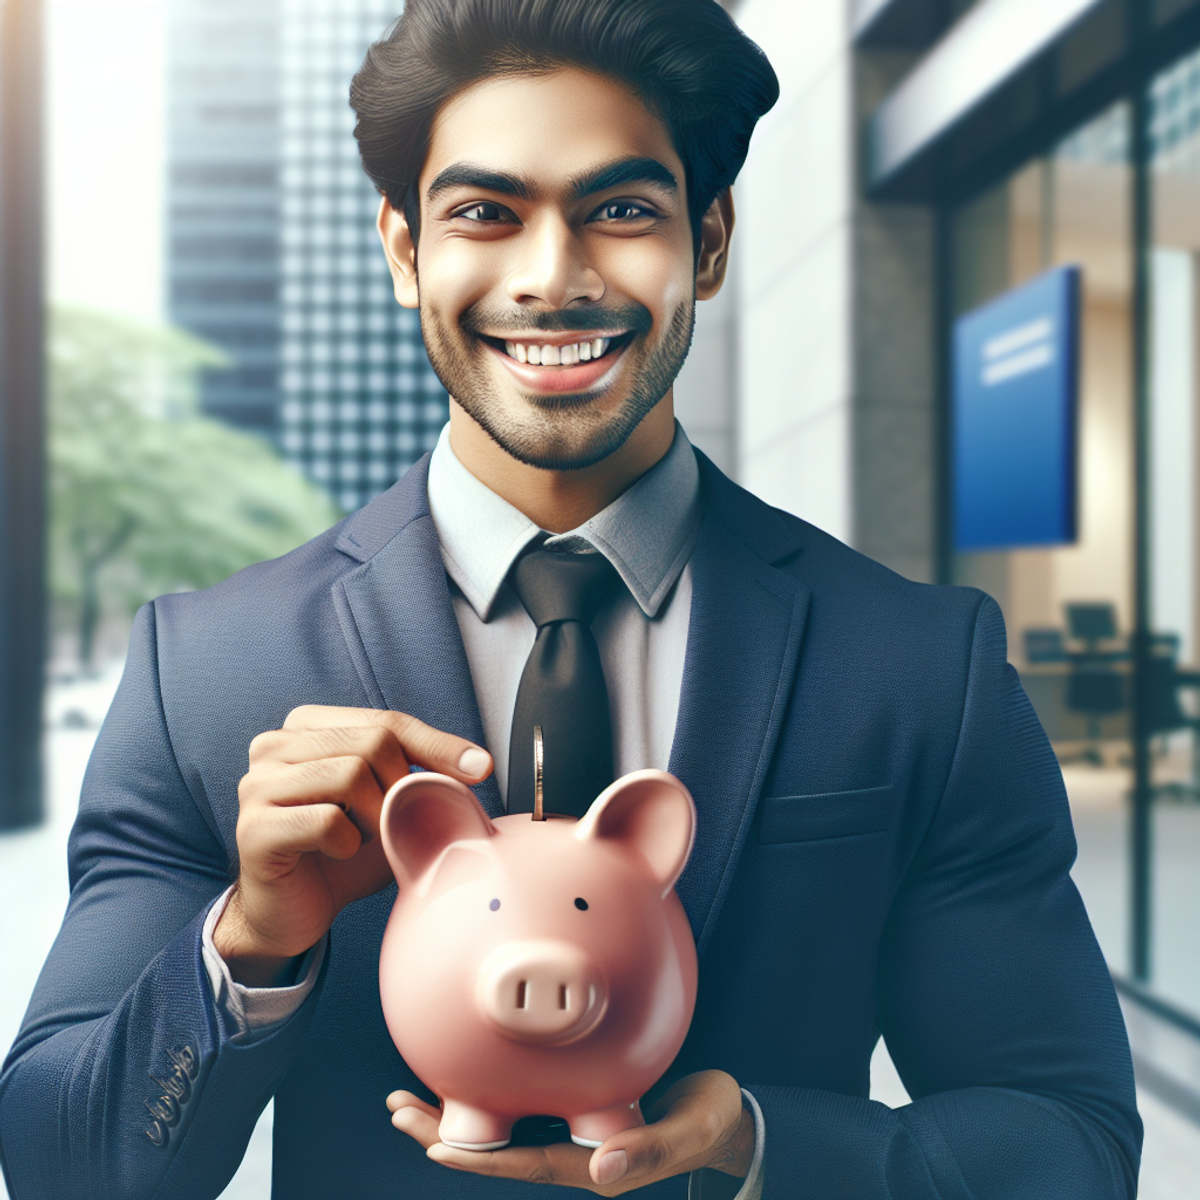 A South Asian man in formal attire cheerfully holds a piggy bank in front of a secure financial institution, symbolizing financial security and smart choices.